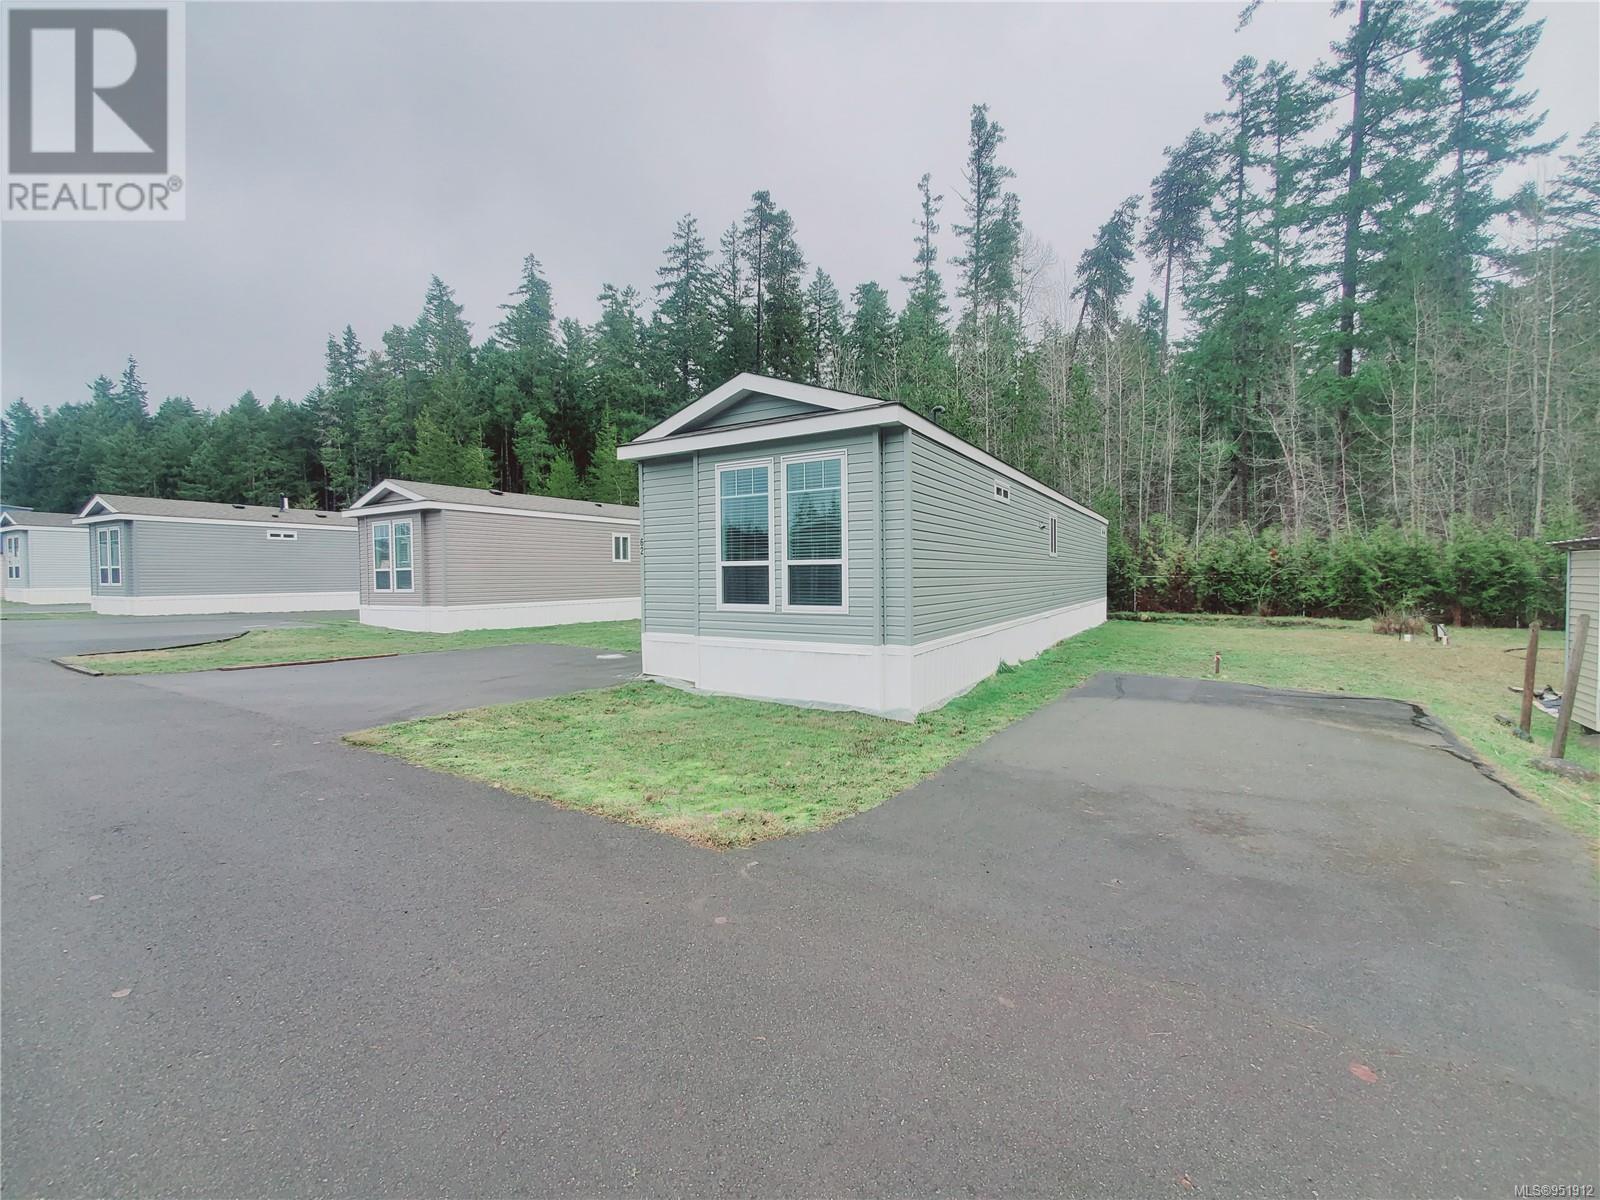 62 1720 Whibley Rd, Coombs, British Columbia  V0R 1M0 - Photo 2 - 951912